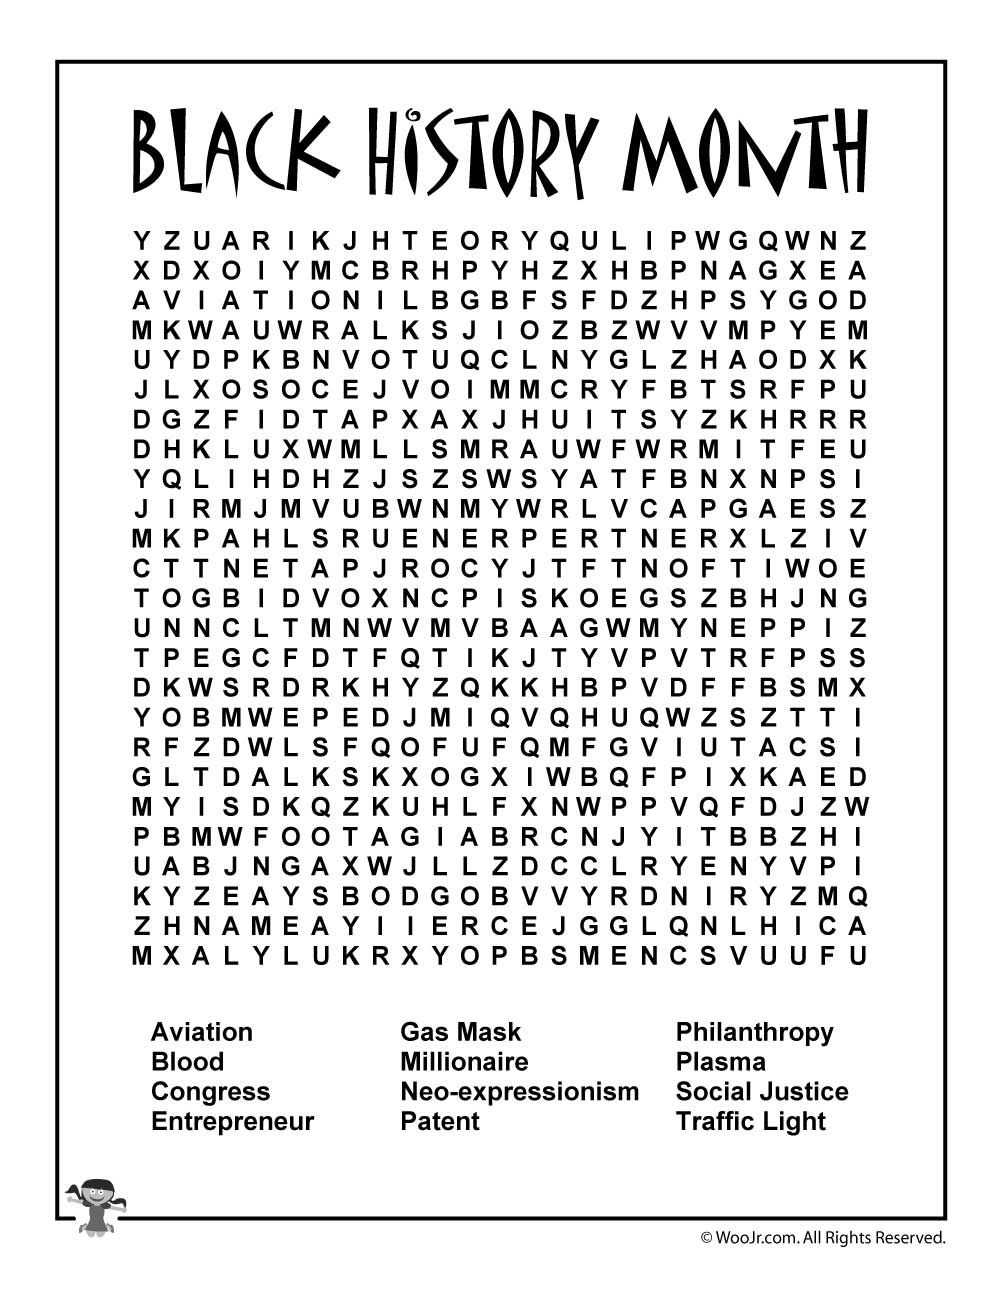 Black History Month For Kids - 6 Amazing African American - Black History Crossword Puzzle Printable